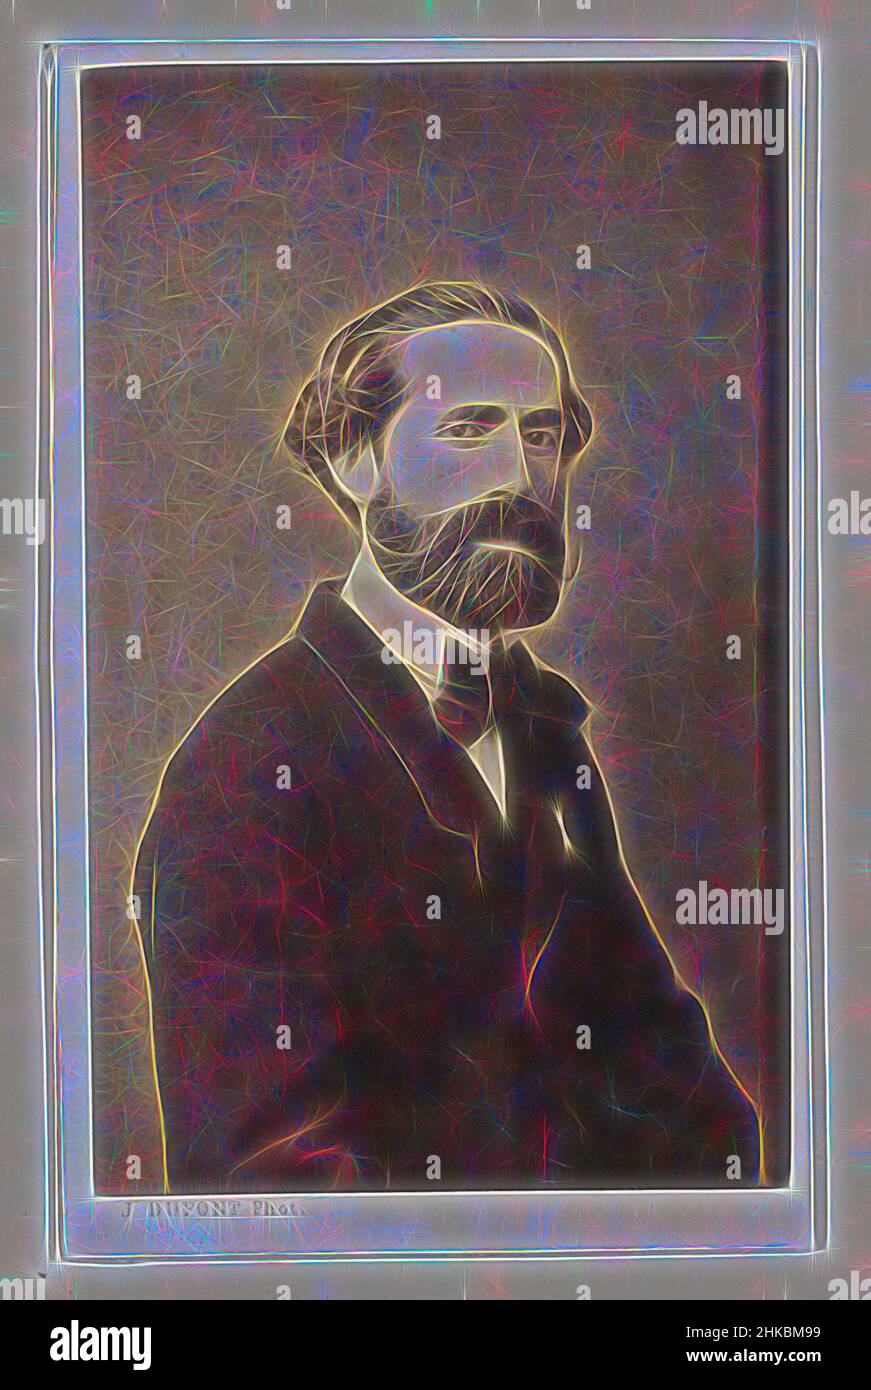 Inspired by Portrait of the painter Joseph Bellemans, half-figure, L'École d'Anvers. Portraits biographies cartes de visite. Collection Dupont, Joseph Dupont, Antwerp, 1861, paper, albumen print, height 102 mm × width 63 mm, Reimagined by Artotop. Classic art reinvented with a modern twist. Design of warm cheerful glowing of brightness and light ray radiance. Photography inspired by surrealism and futurism, embracing dynamic energy of modern technology, movement, speed and revolutionize culture Stock Photo